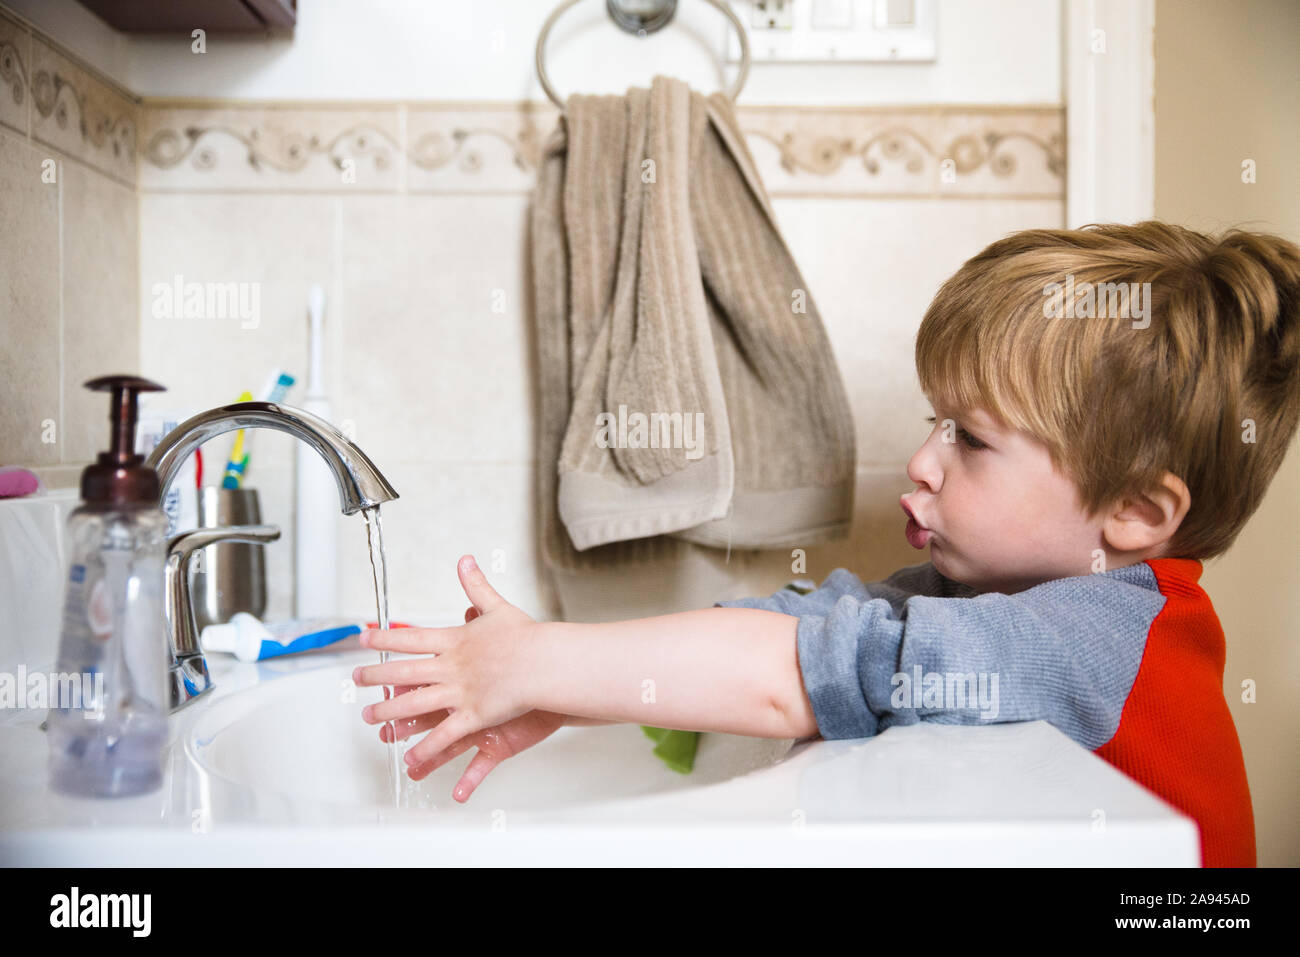 A little boy washes his hands in the bathroom sink. Stock Photo